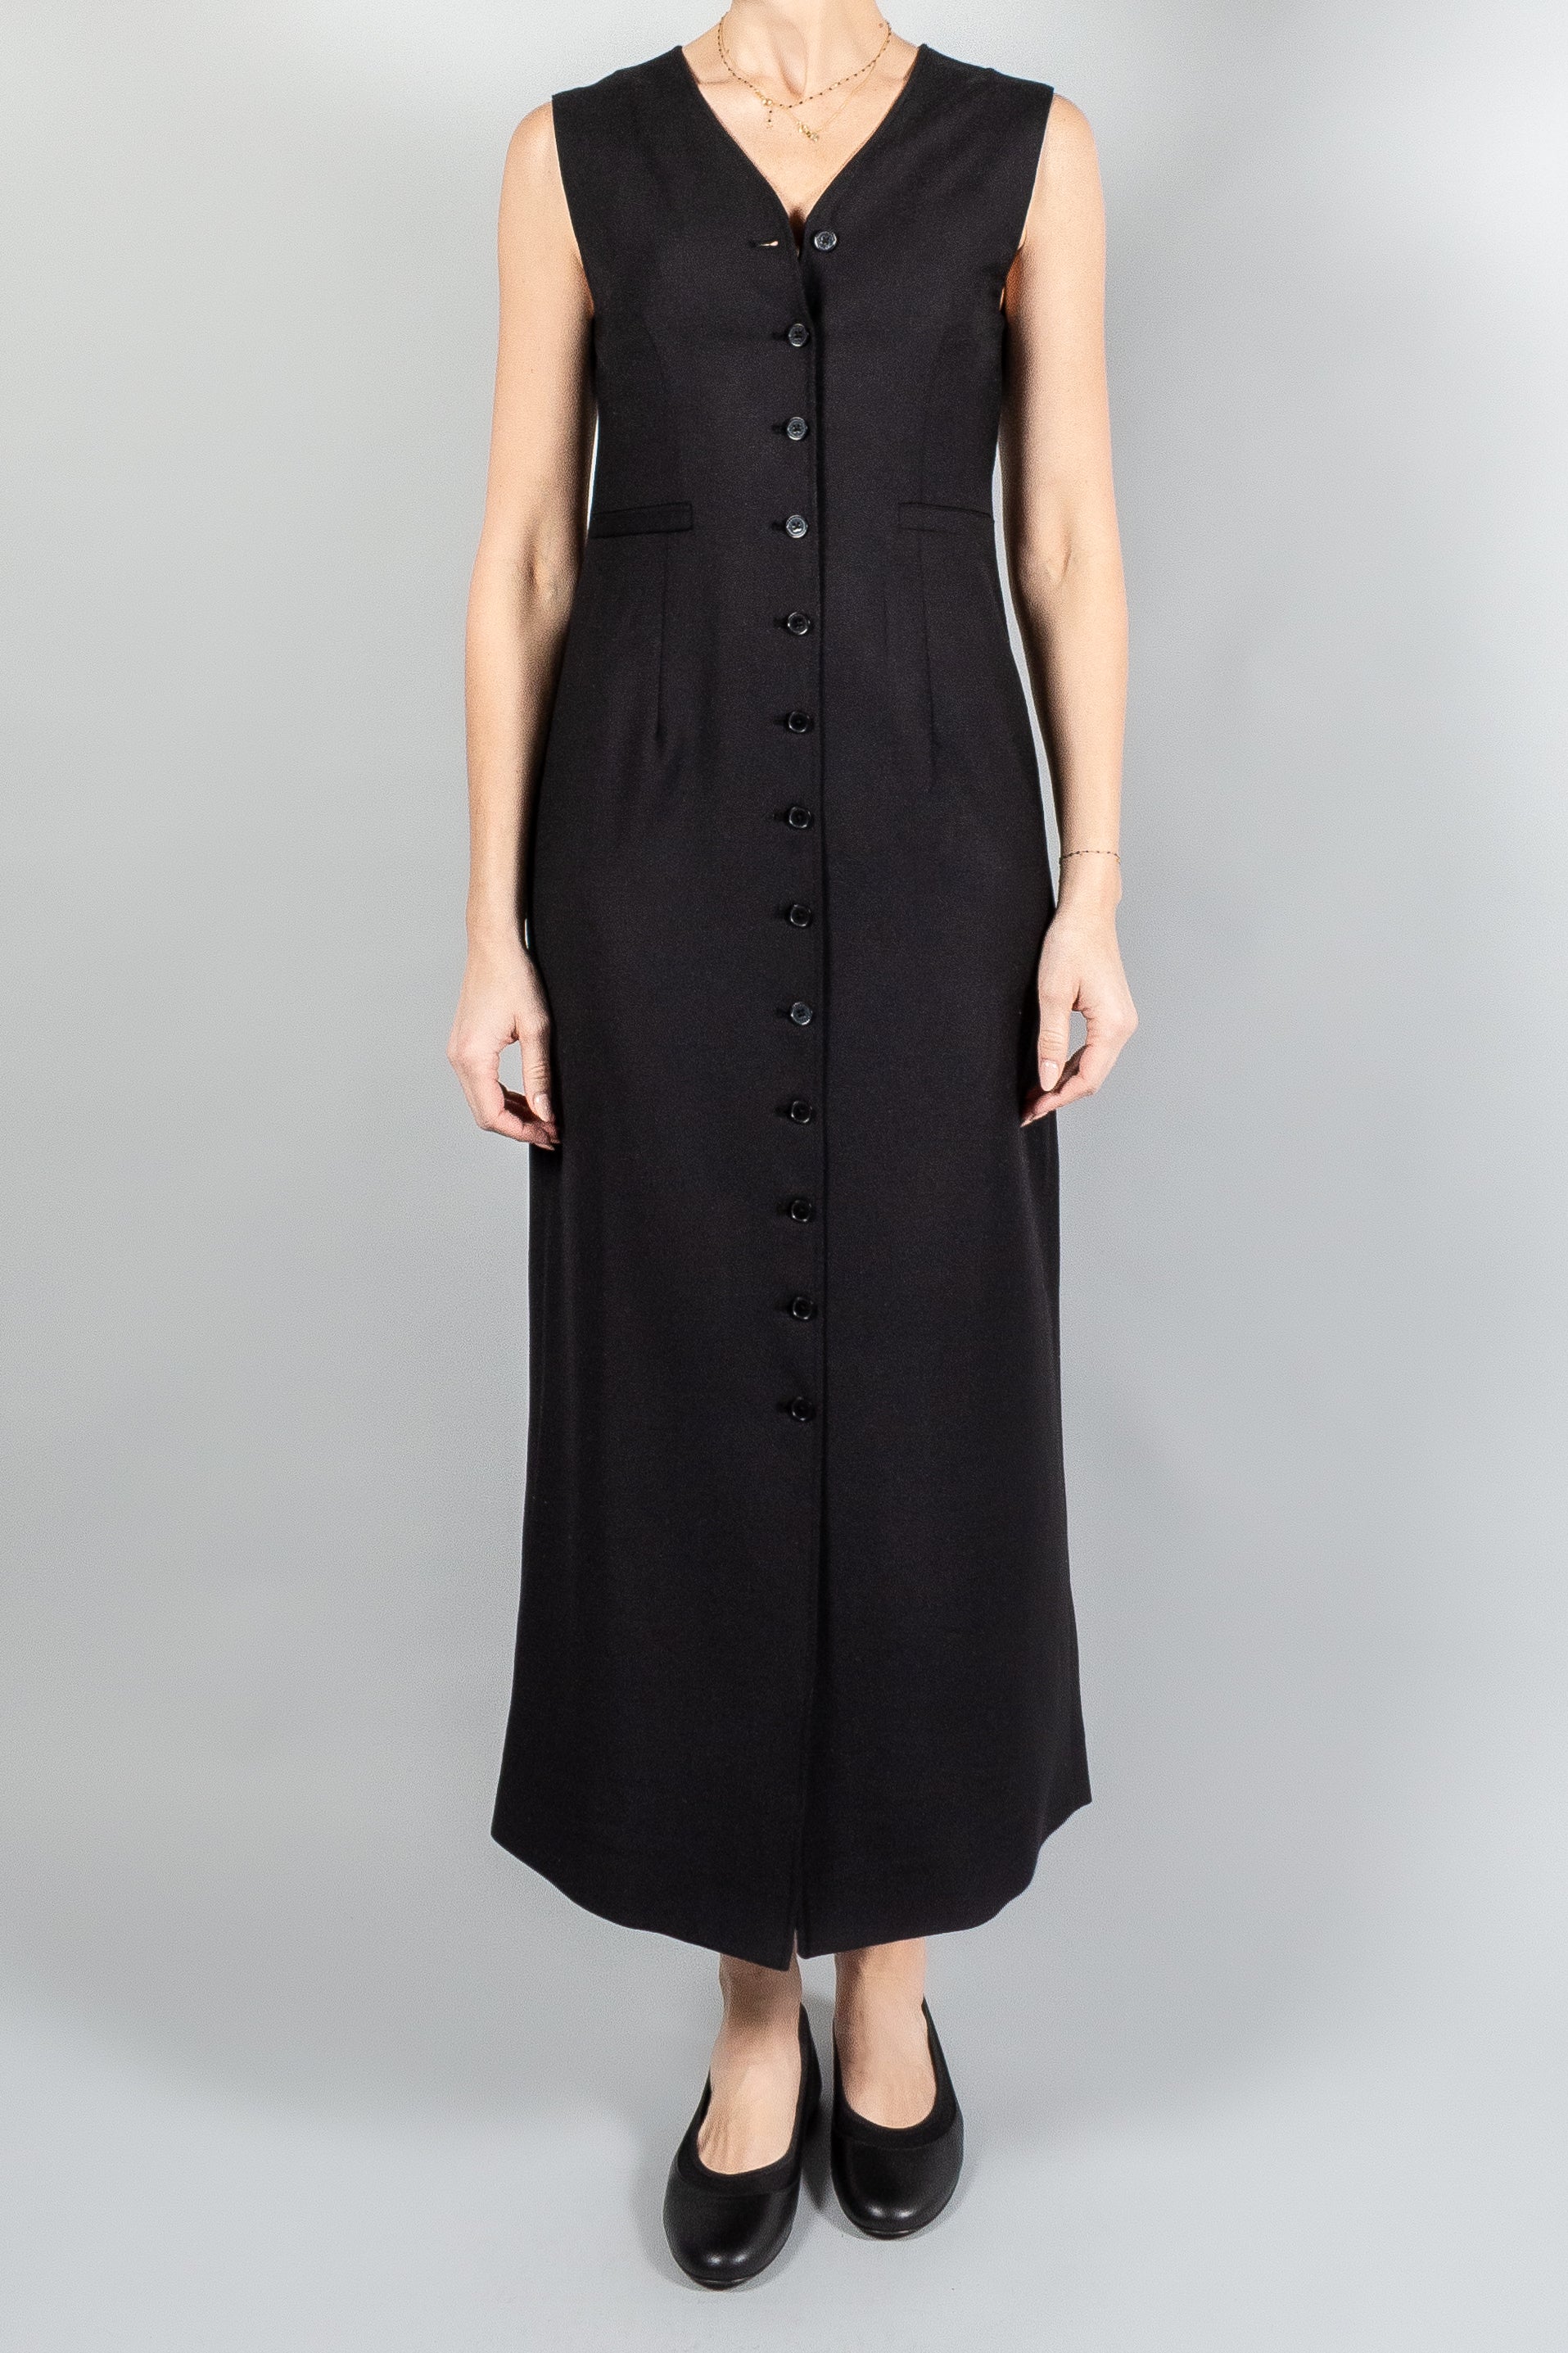 Loulou Studio Idika Long Buttoned Dress-Dresses and Jumsuits-Misch-Boutique-Vancouver-Canada-misch.ca